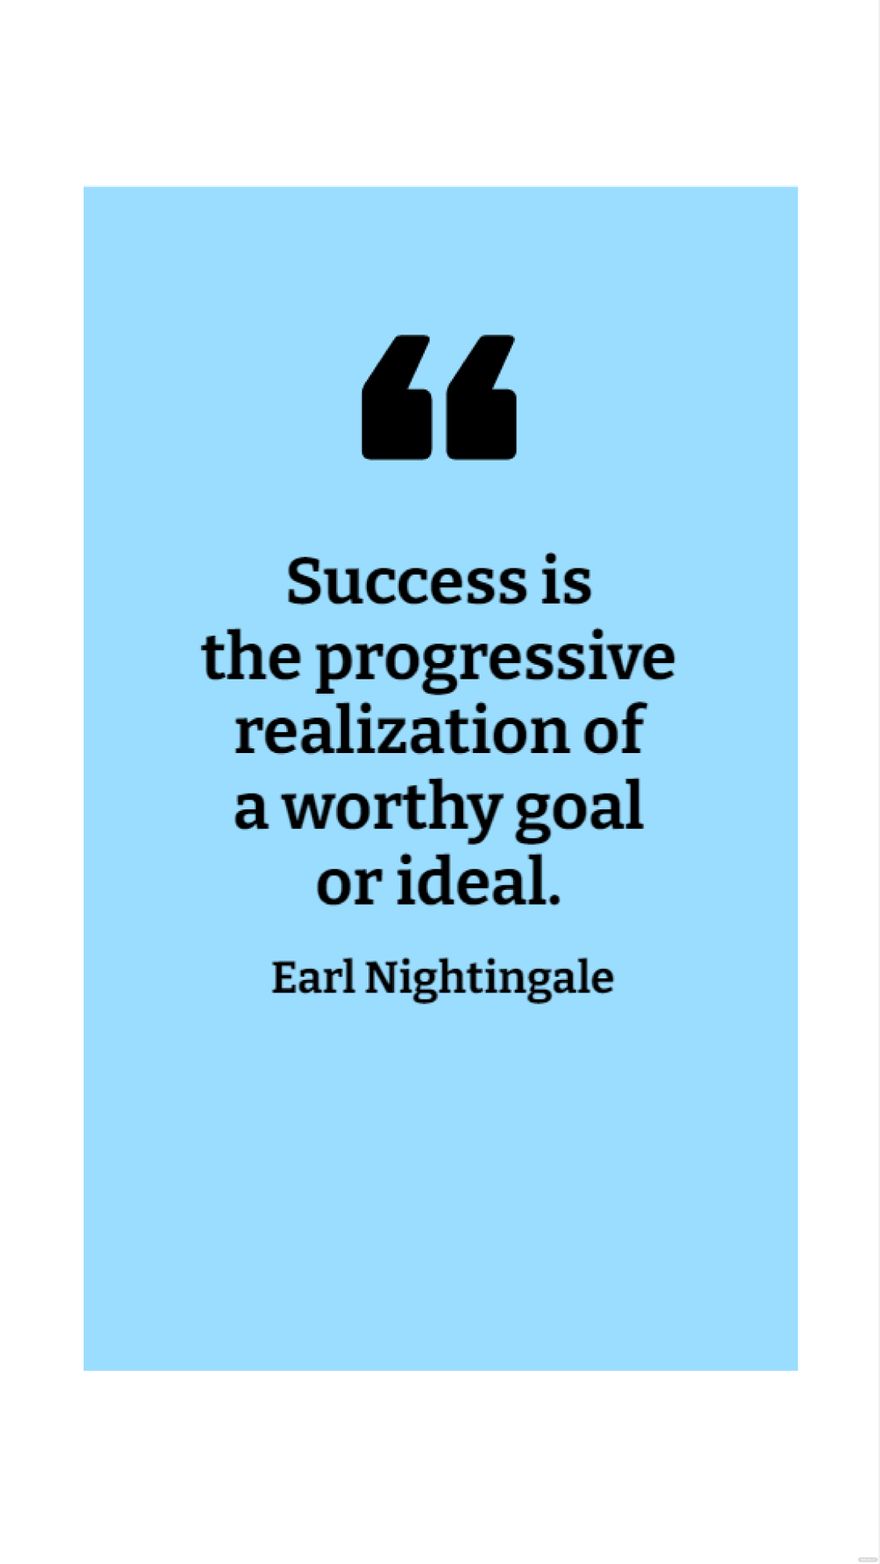 Earl Nightingale - Success is the progressive realization of a worthy goal or ideal.